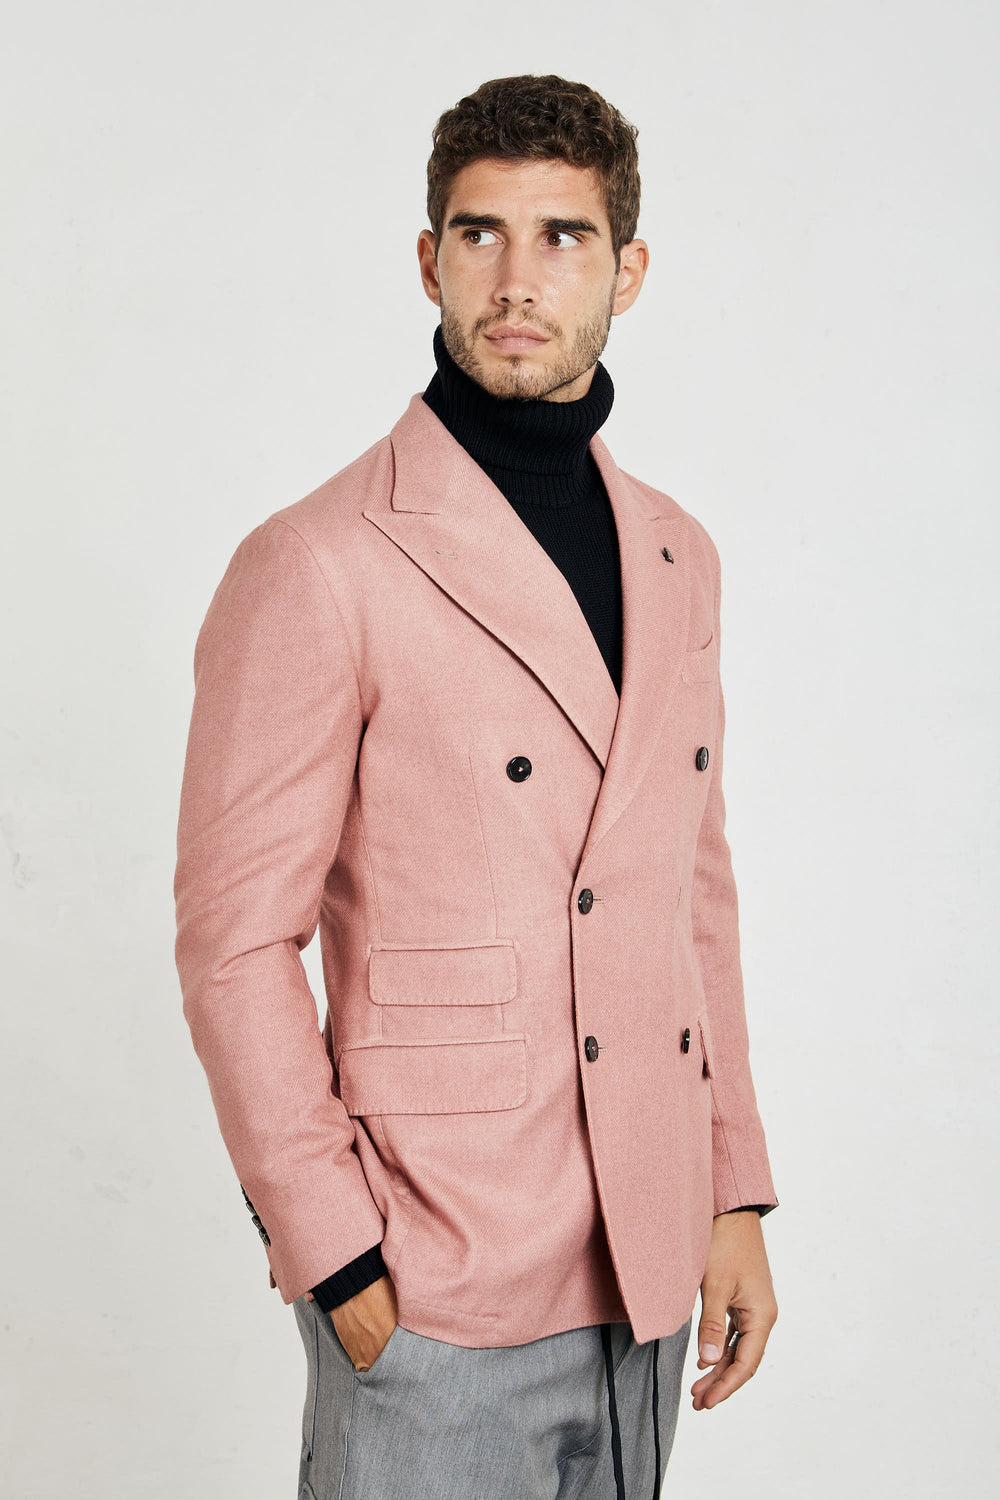 Gabriele Pasini Jackets and Suits online